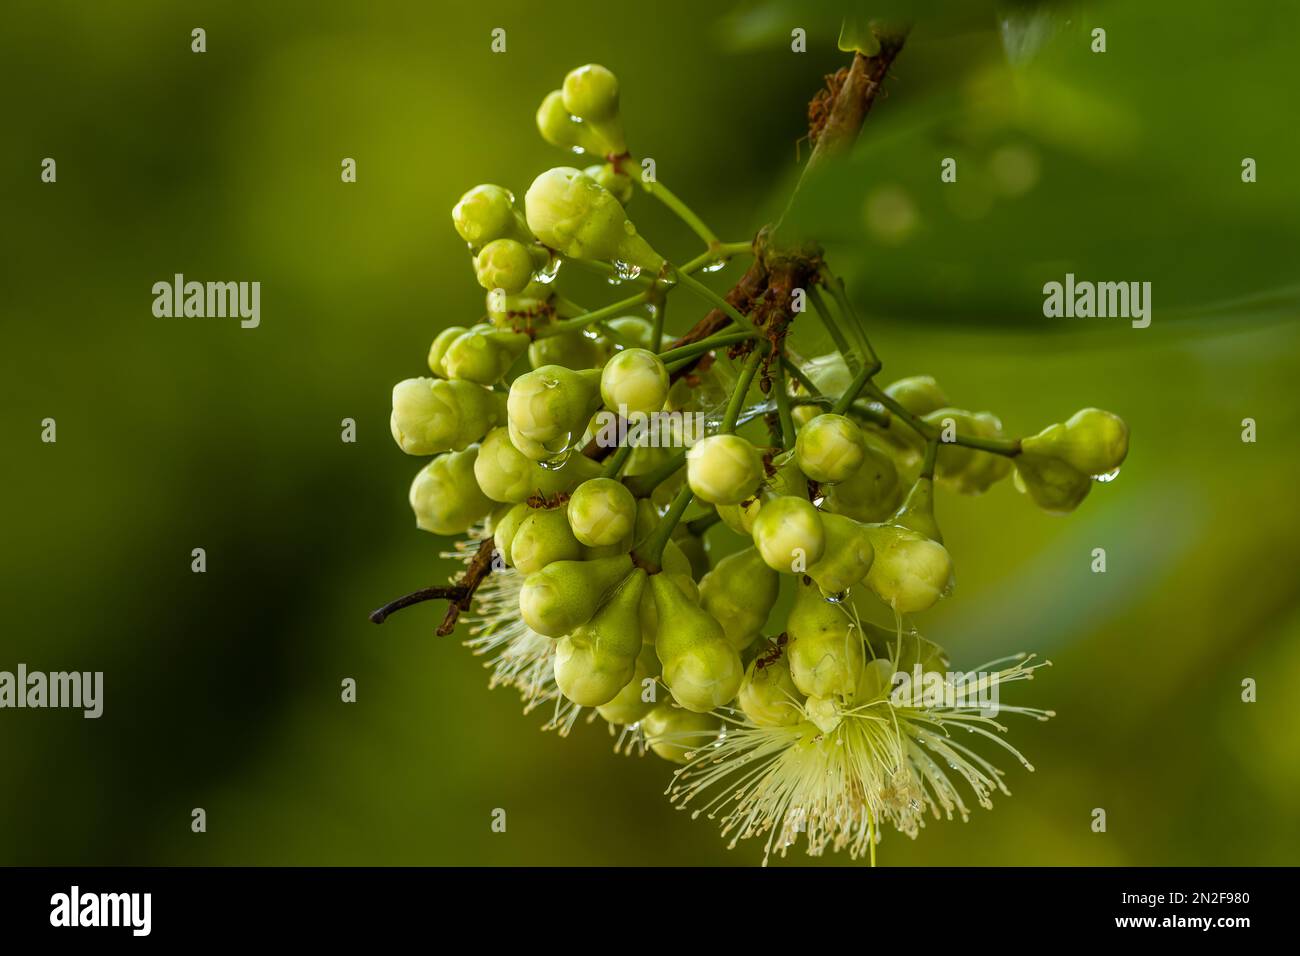 The prospective watery rose apple flower that is about to bloom becomes a flower still wet with morning dew, the background of green leaves is blurry Stock Photo